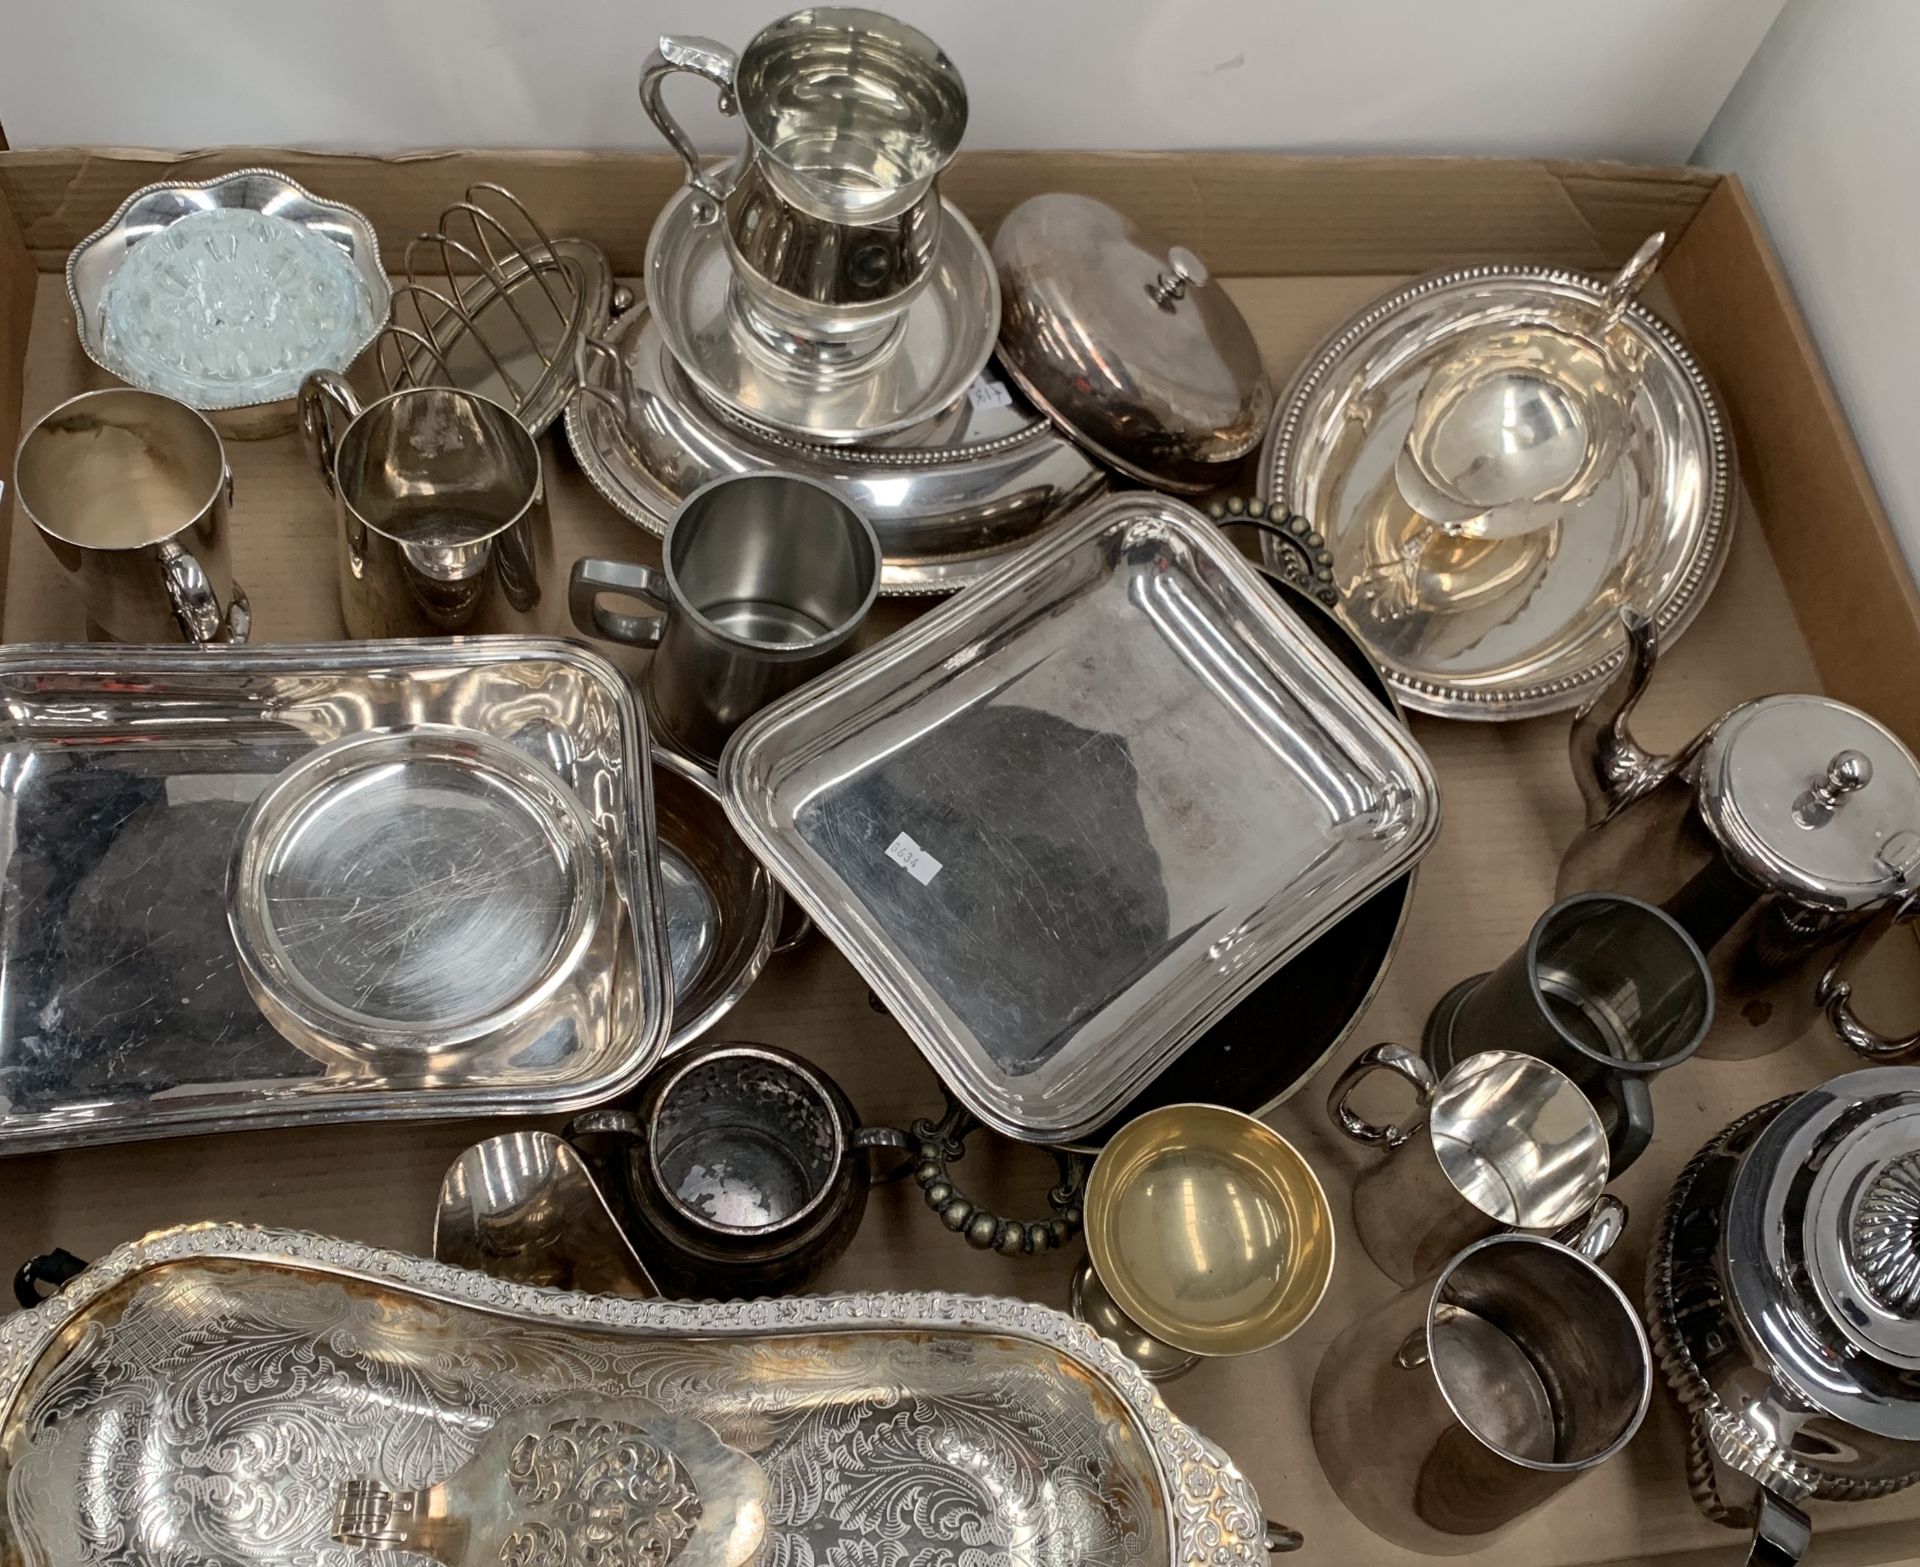 Contents to tray - a quantity of plated ware teapots, trays, dishes, tankards etc.